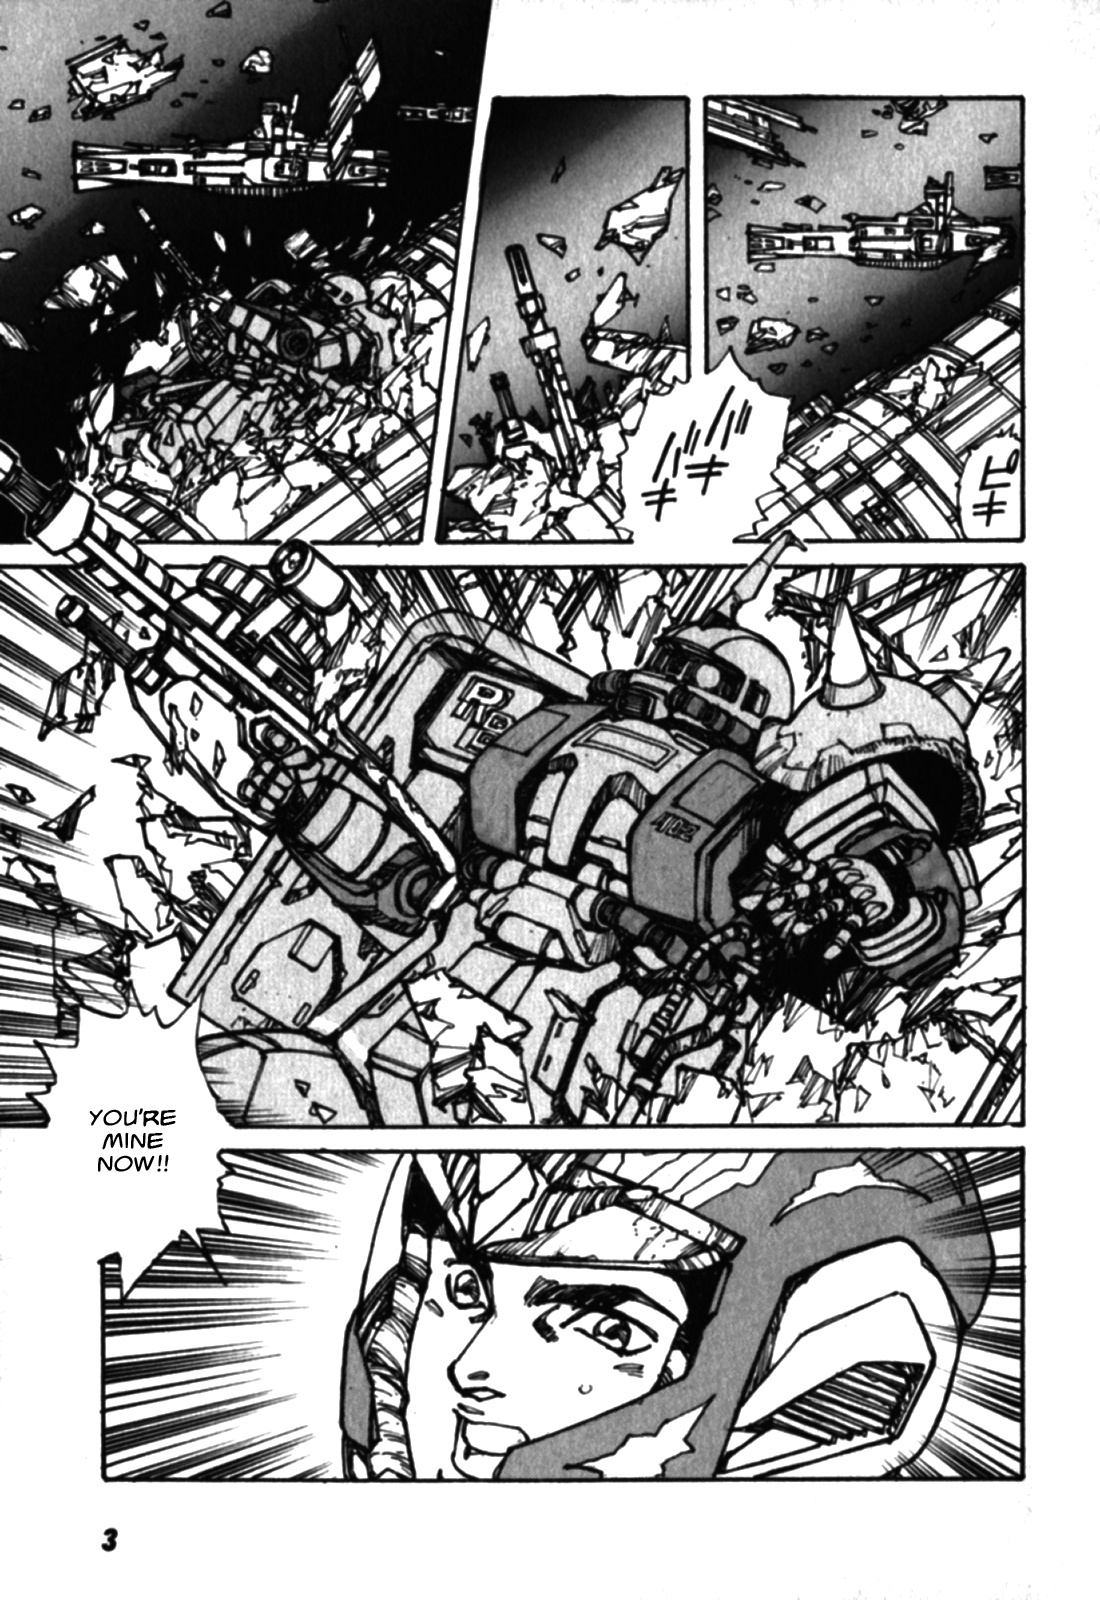 Gundam Pilot Series Of Biographies - The Brave Soldiers In The Sky - Page 4